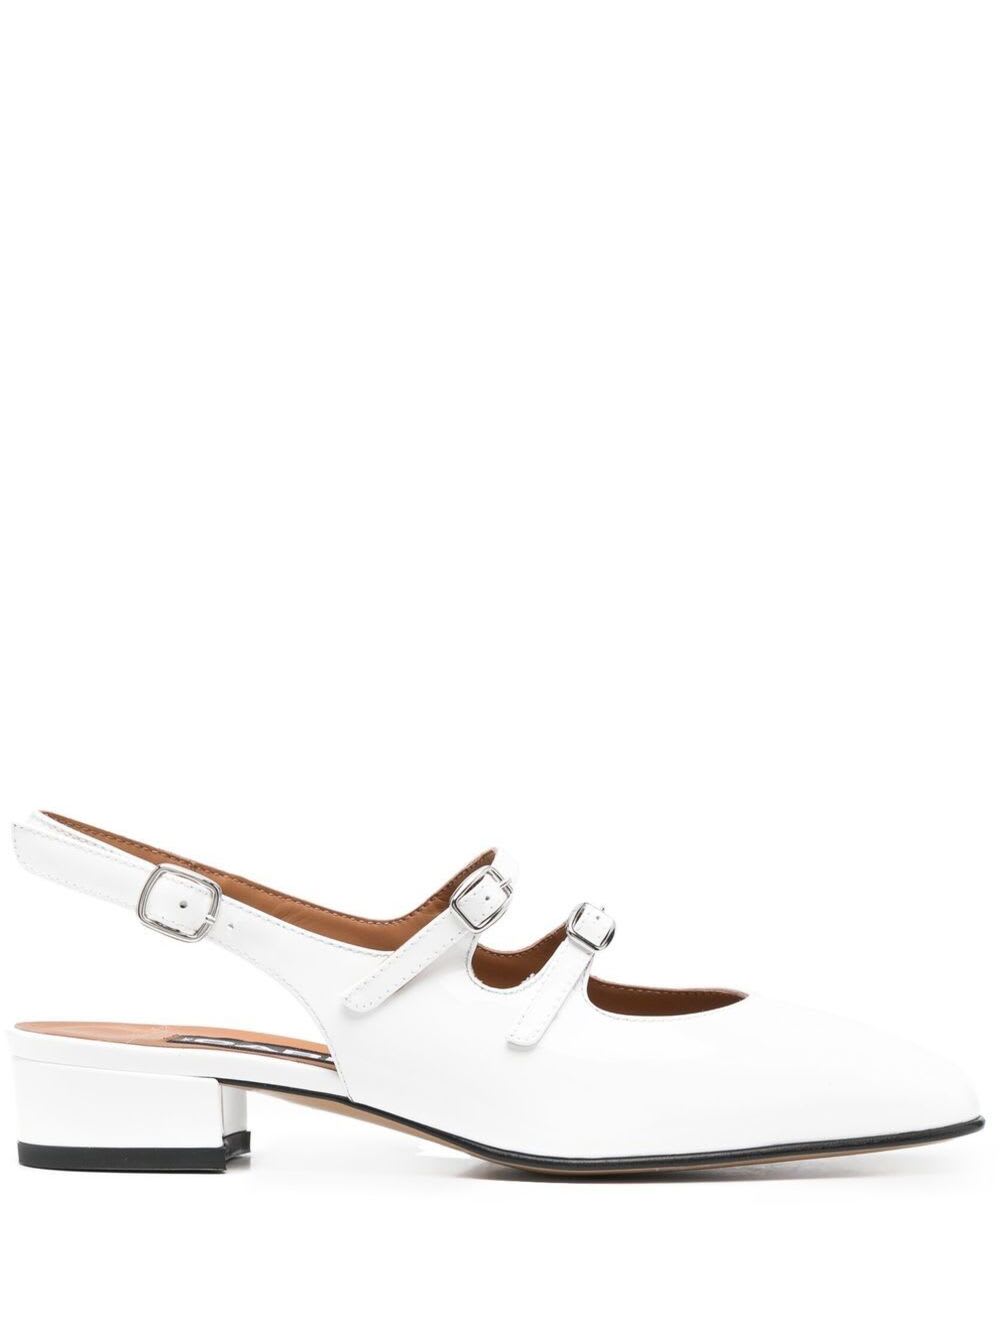 CAREL WHITE PATENT PECHE LEATHER MARY JANE PUMPS WOMAN